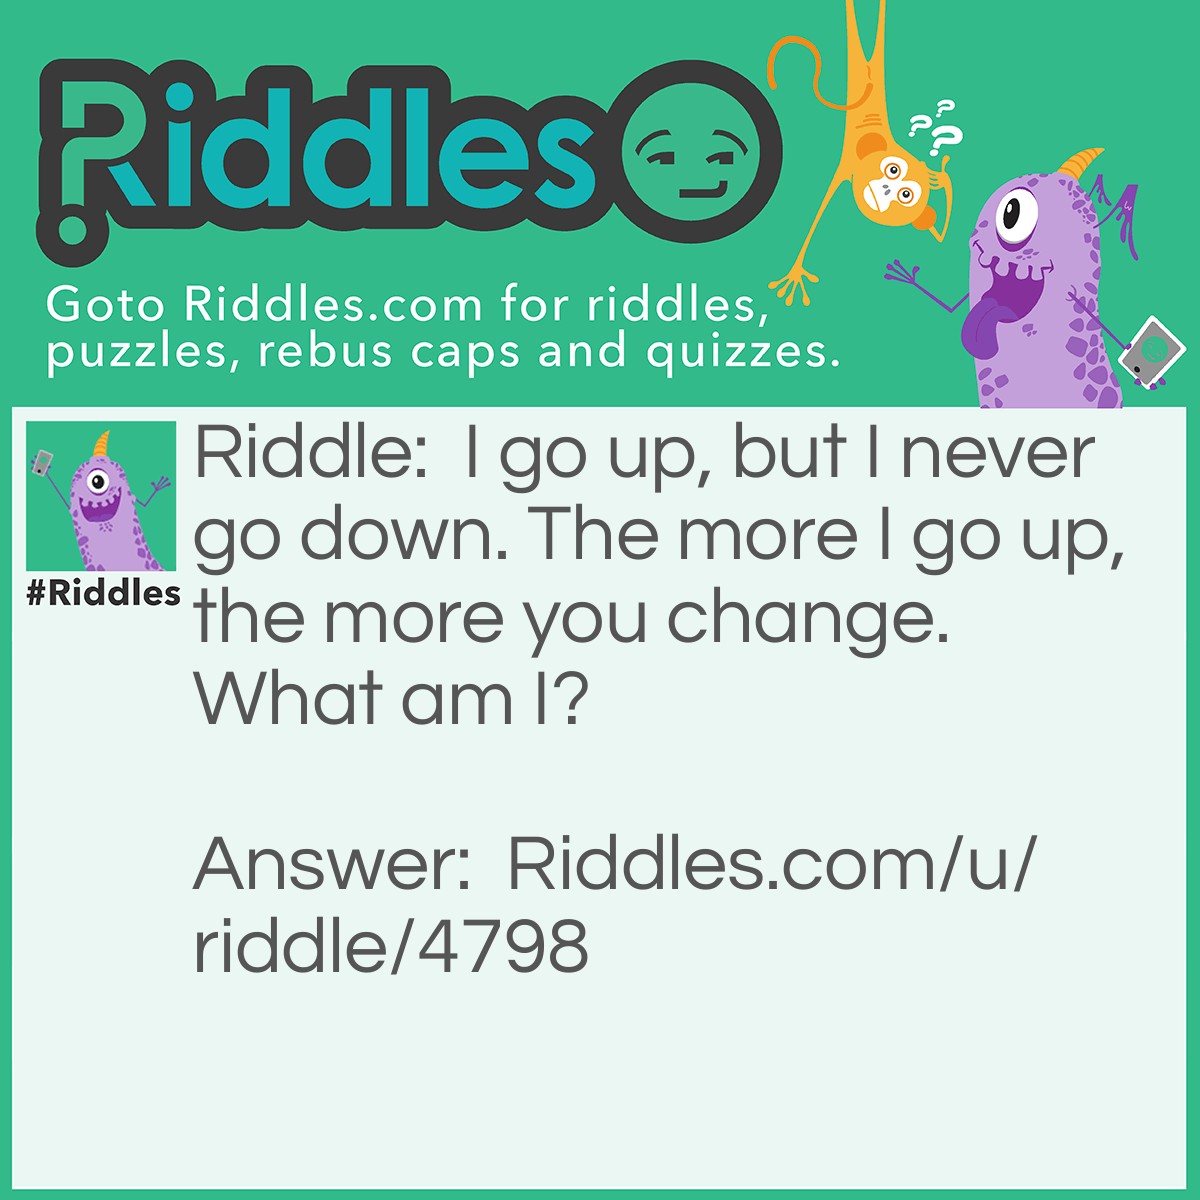 Riddle: I go up, but I never go down. The more I go up, the more you change. What am I? Answer: Age.